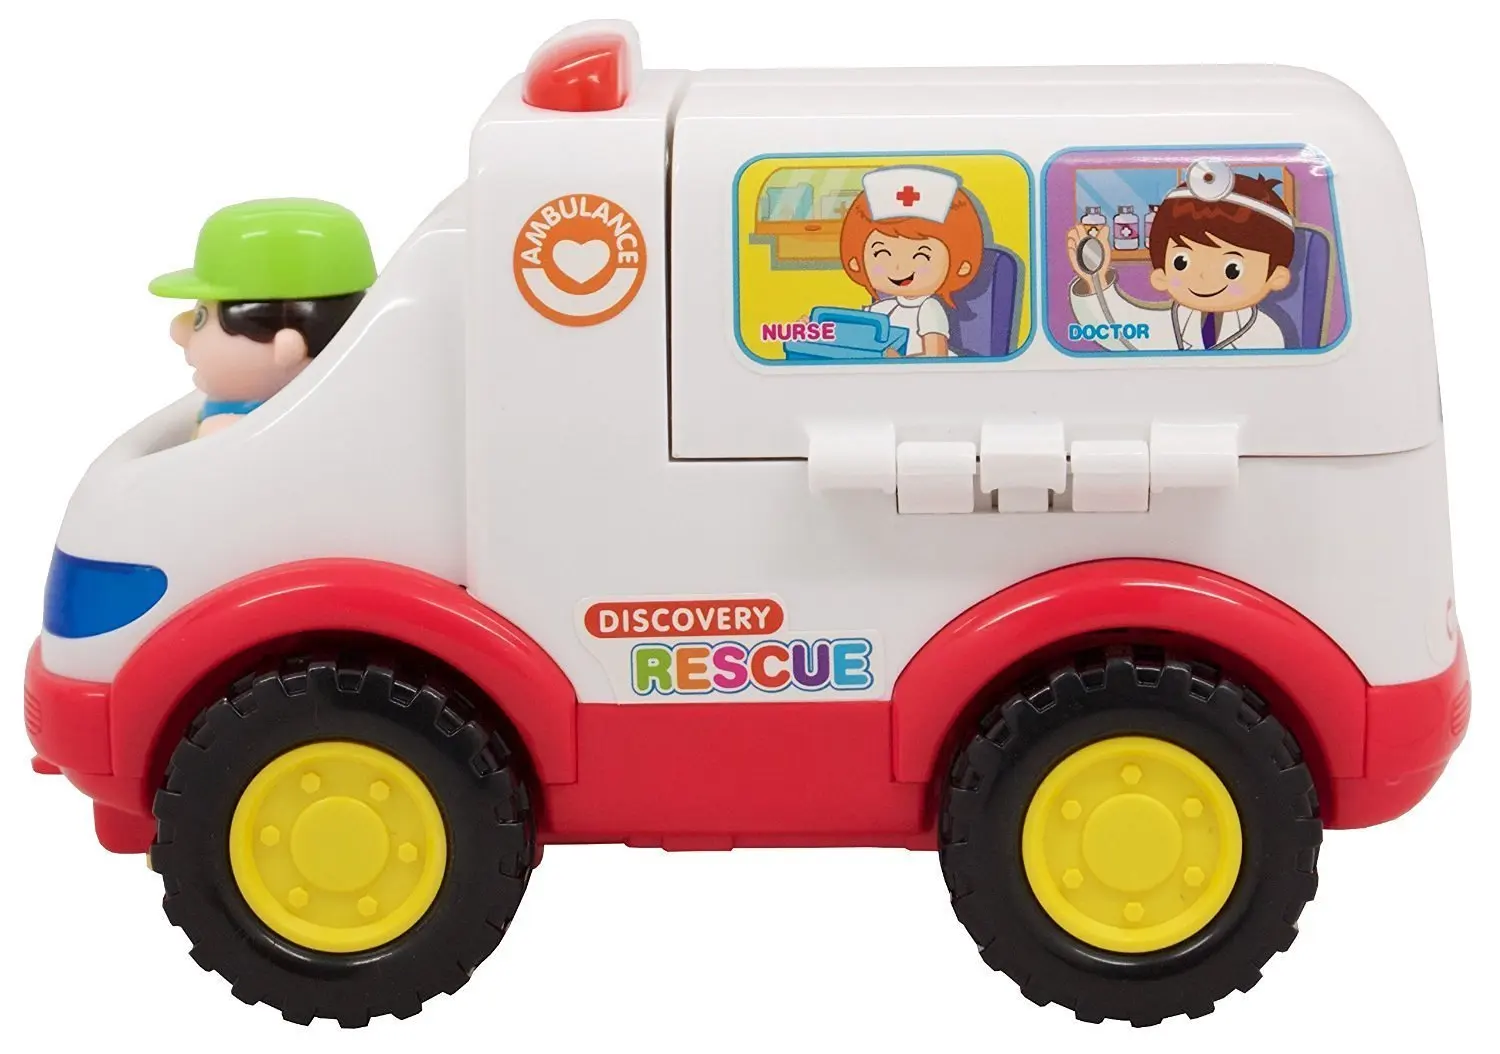 Rescued toys. Discovery Rescue игрушка машина. Машина скорой помощи Discovery Rescue игрушка. Ambulance Toy.